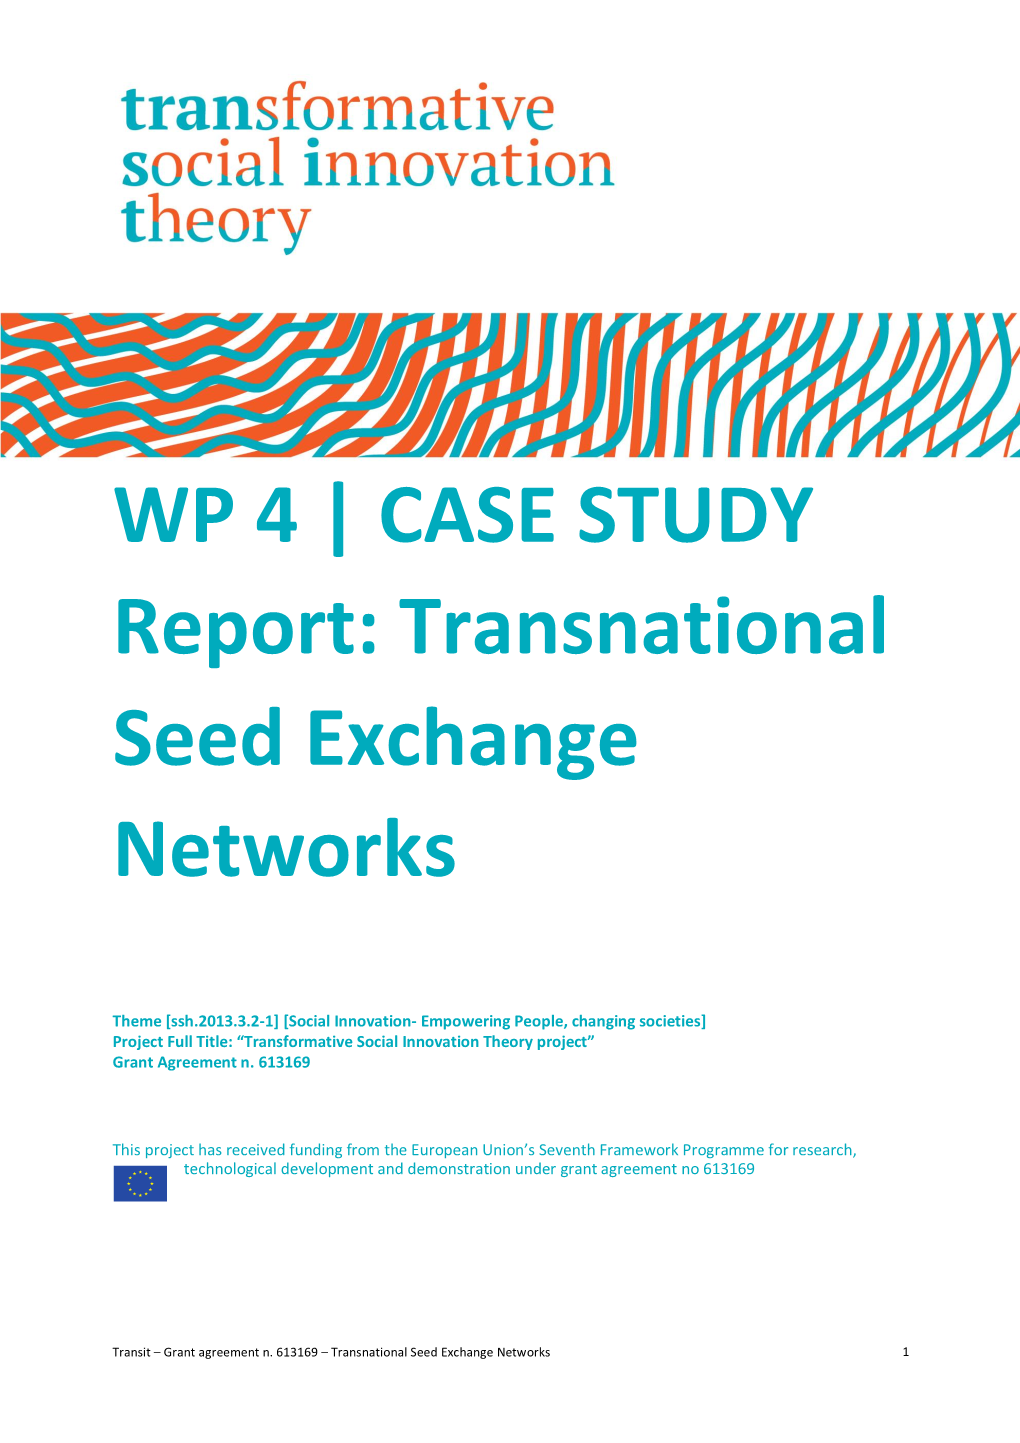 CASE STUDY Report: Transnational Seed Exchange Networks